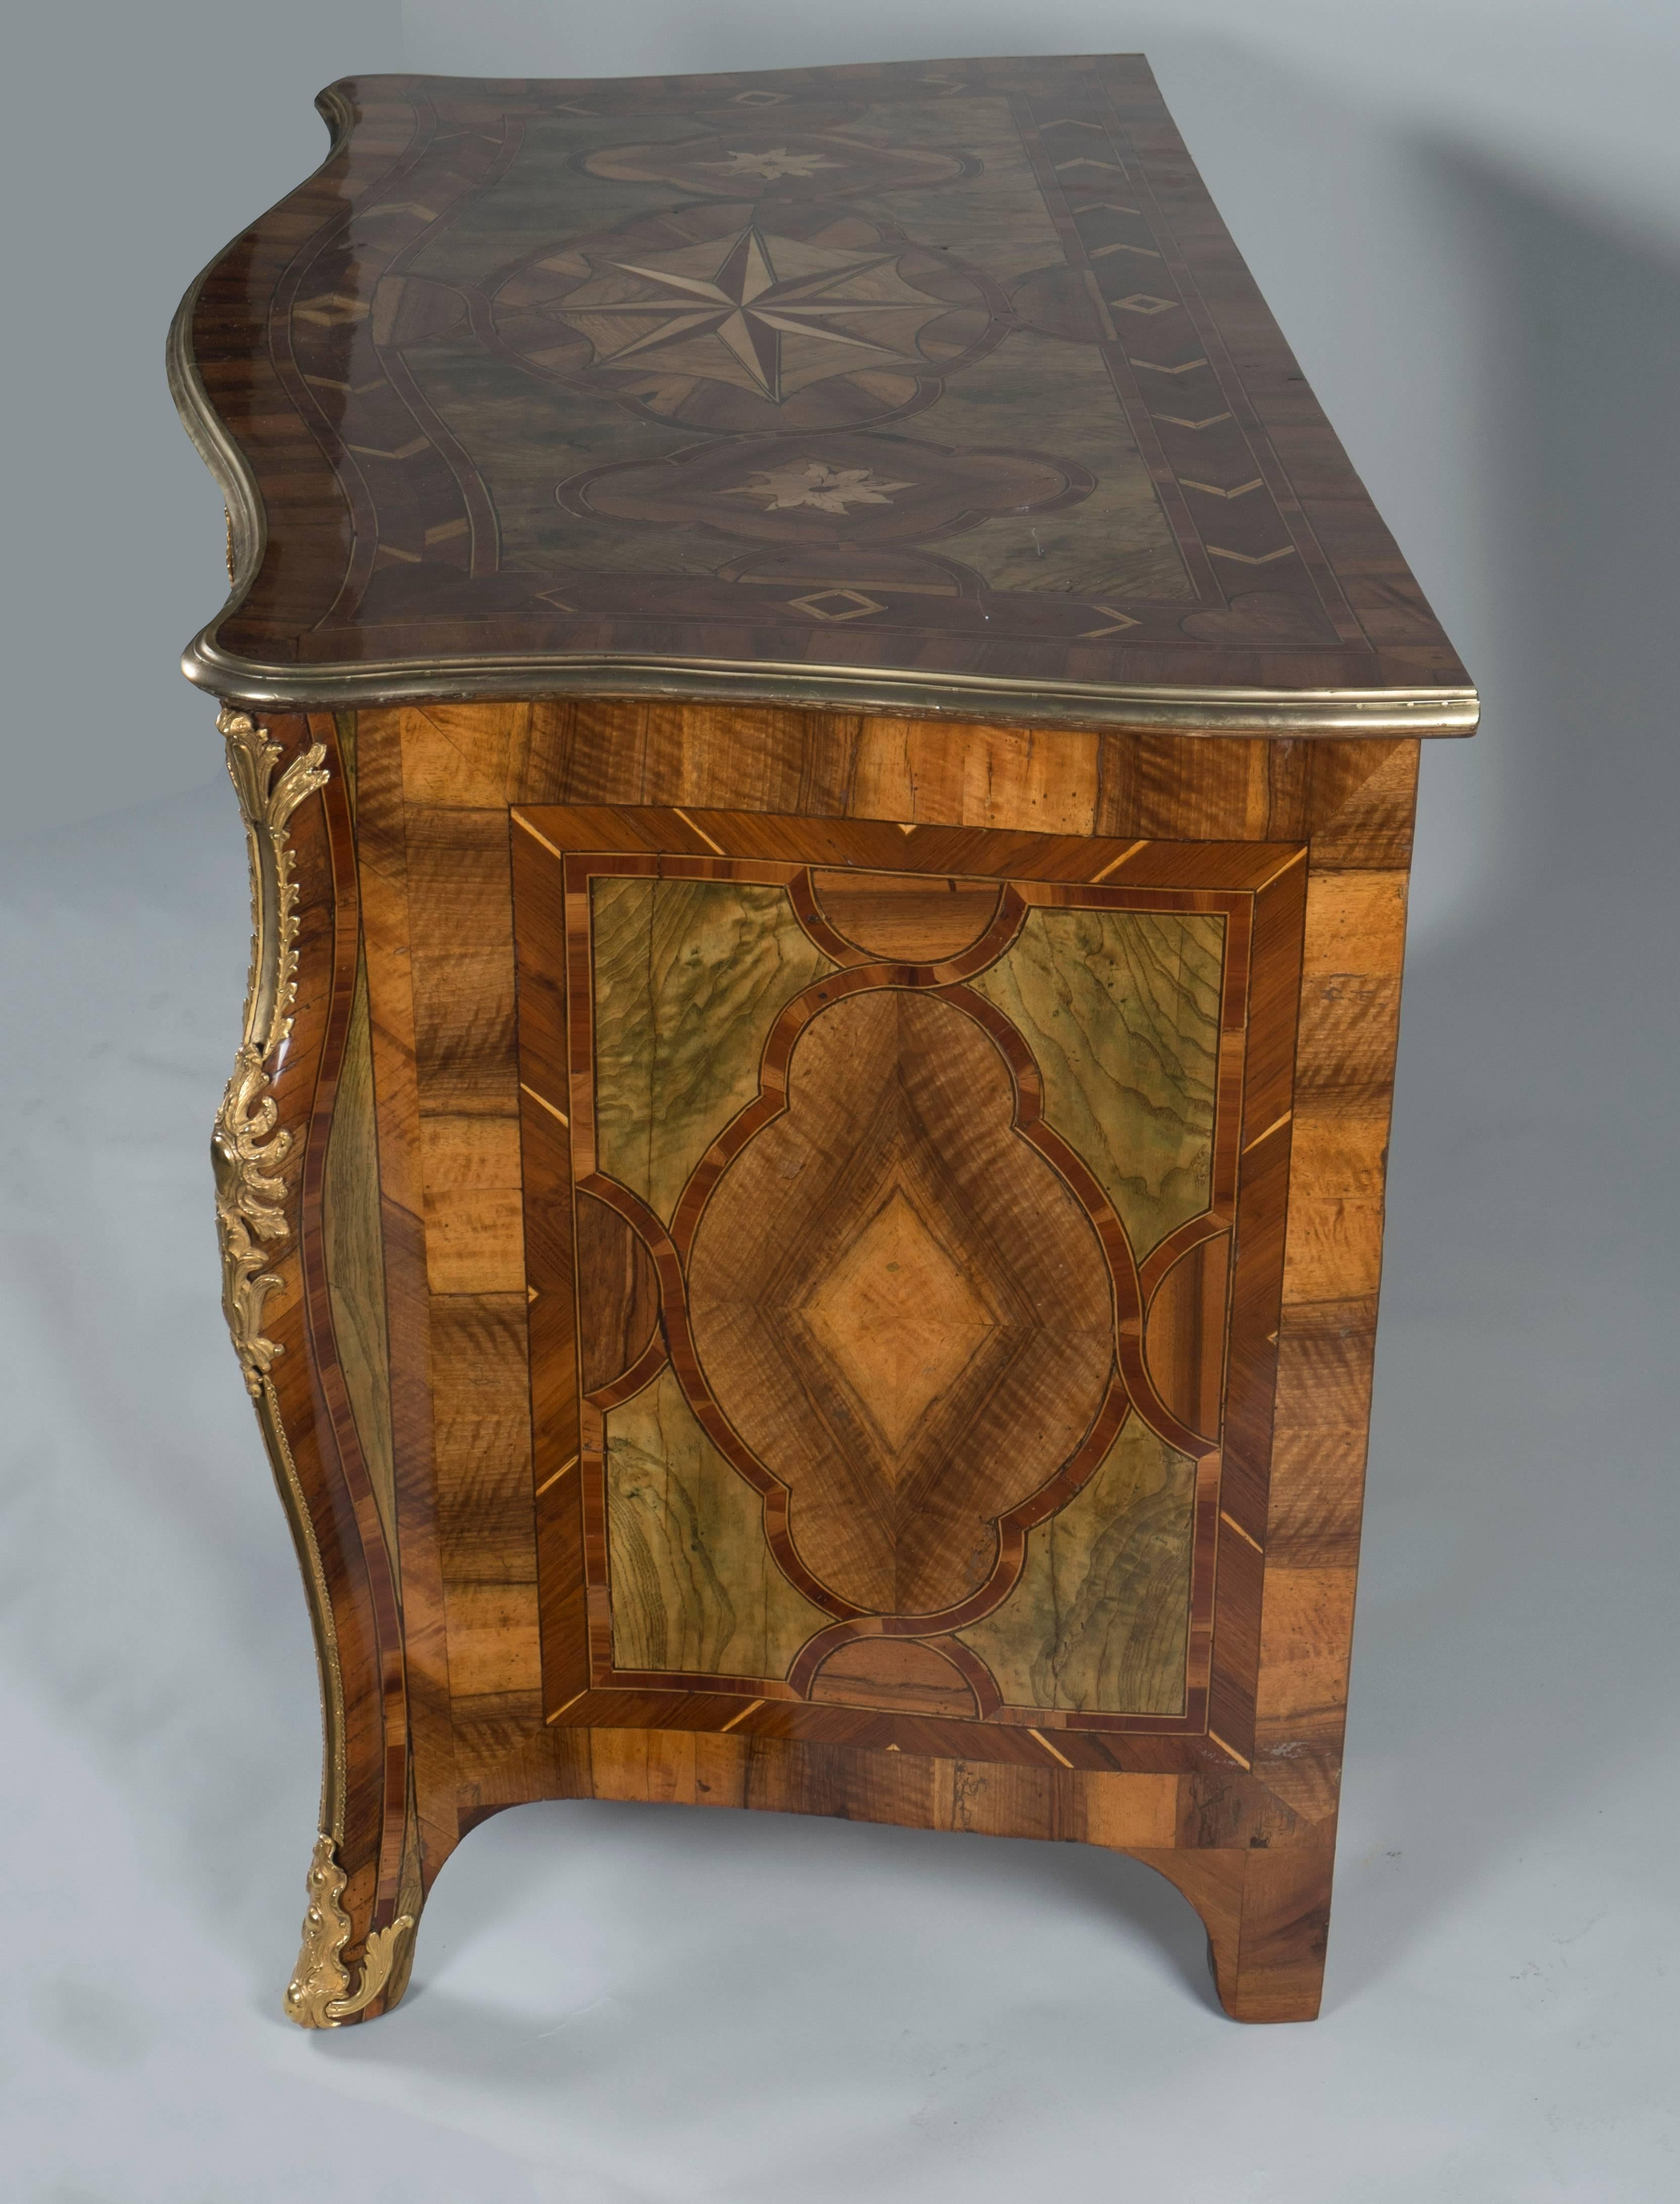 This commode opens by three curved rows of drawers made of tainted green ash, sycamore and ornamental plum tree.

Work from the French "Régence" period from Dauphiné.

Because of its rich marquetry, its architecture and the woods